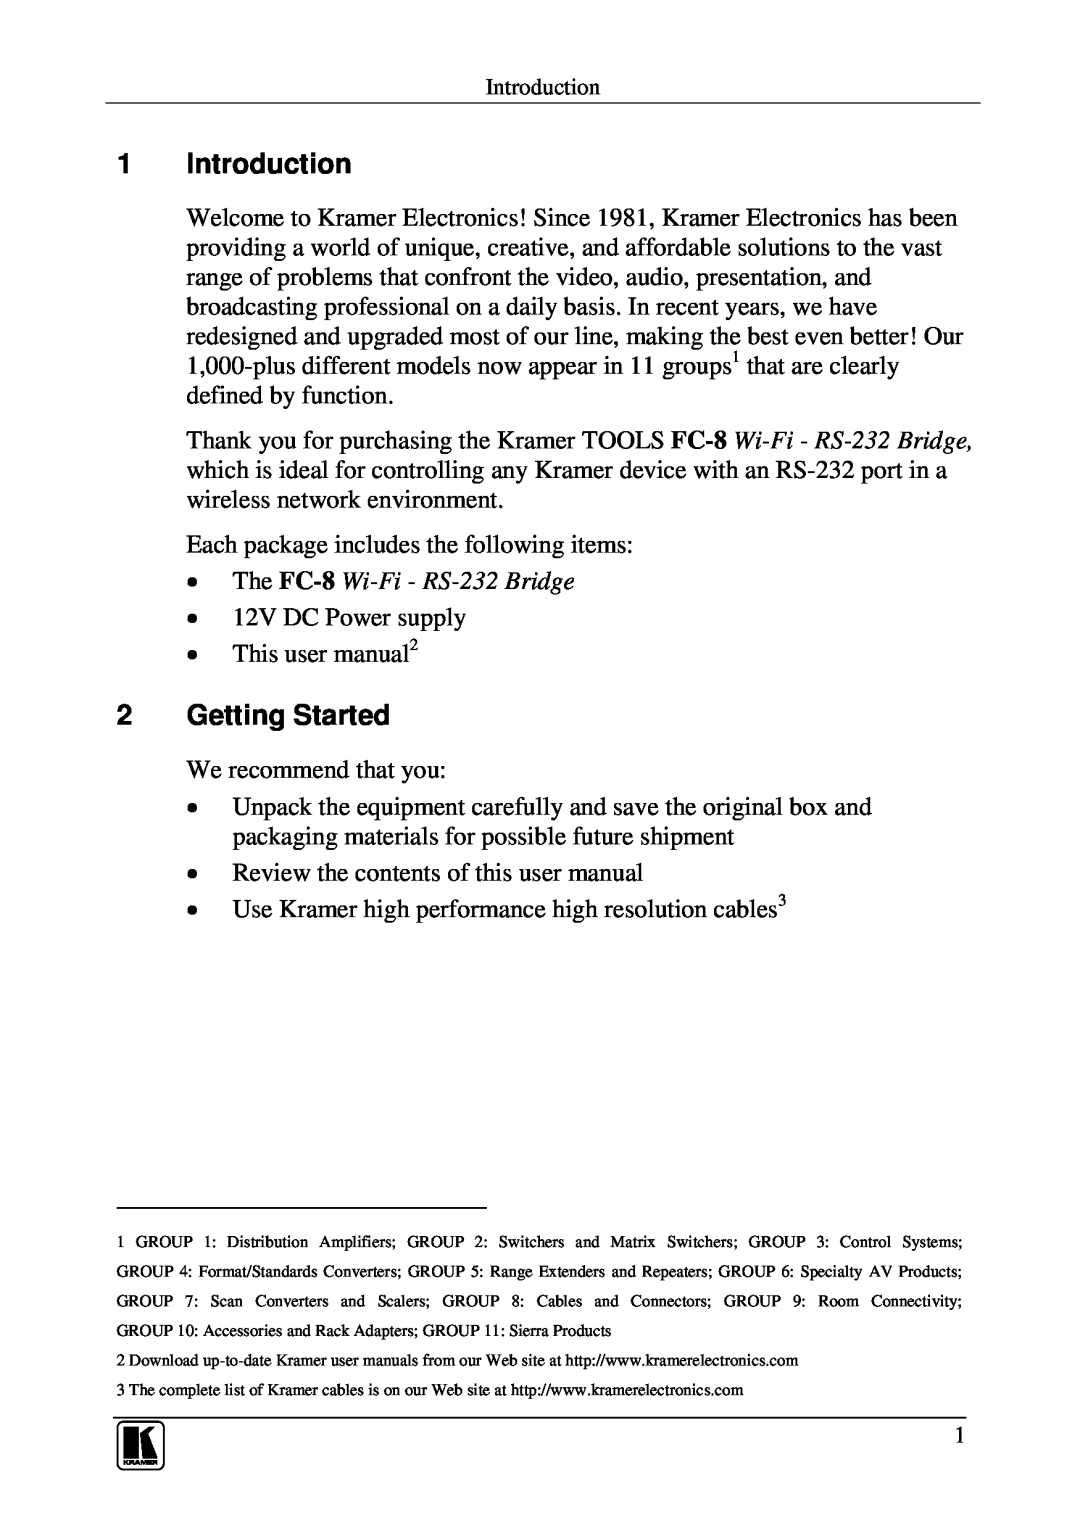 Kramer Electronics user manual Introduction, Getting Started, The FC-8 Wi-Fi - RS-232 Bridge 